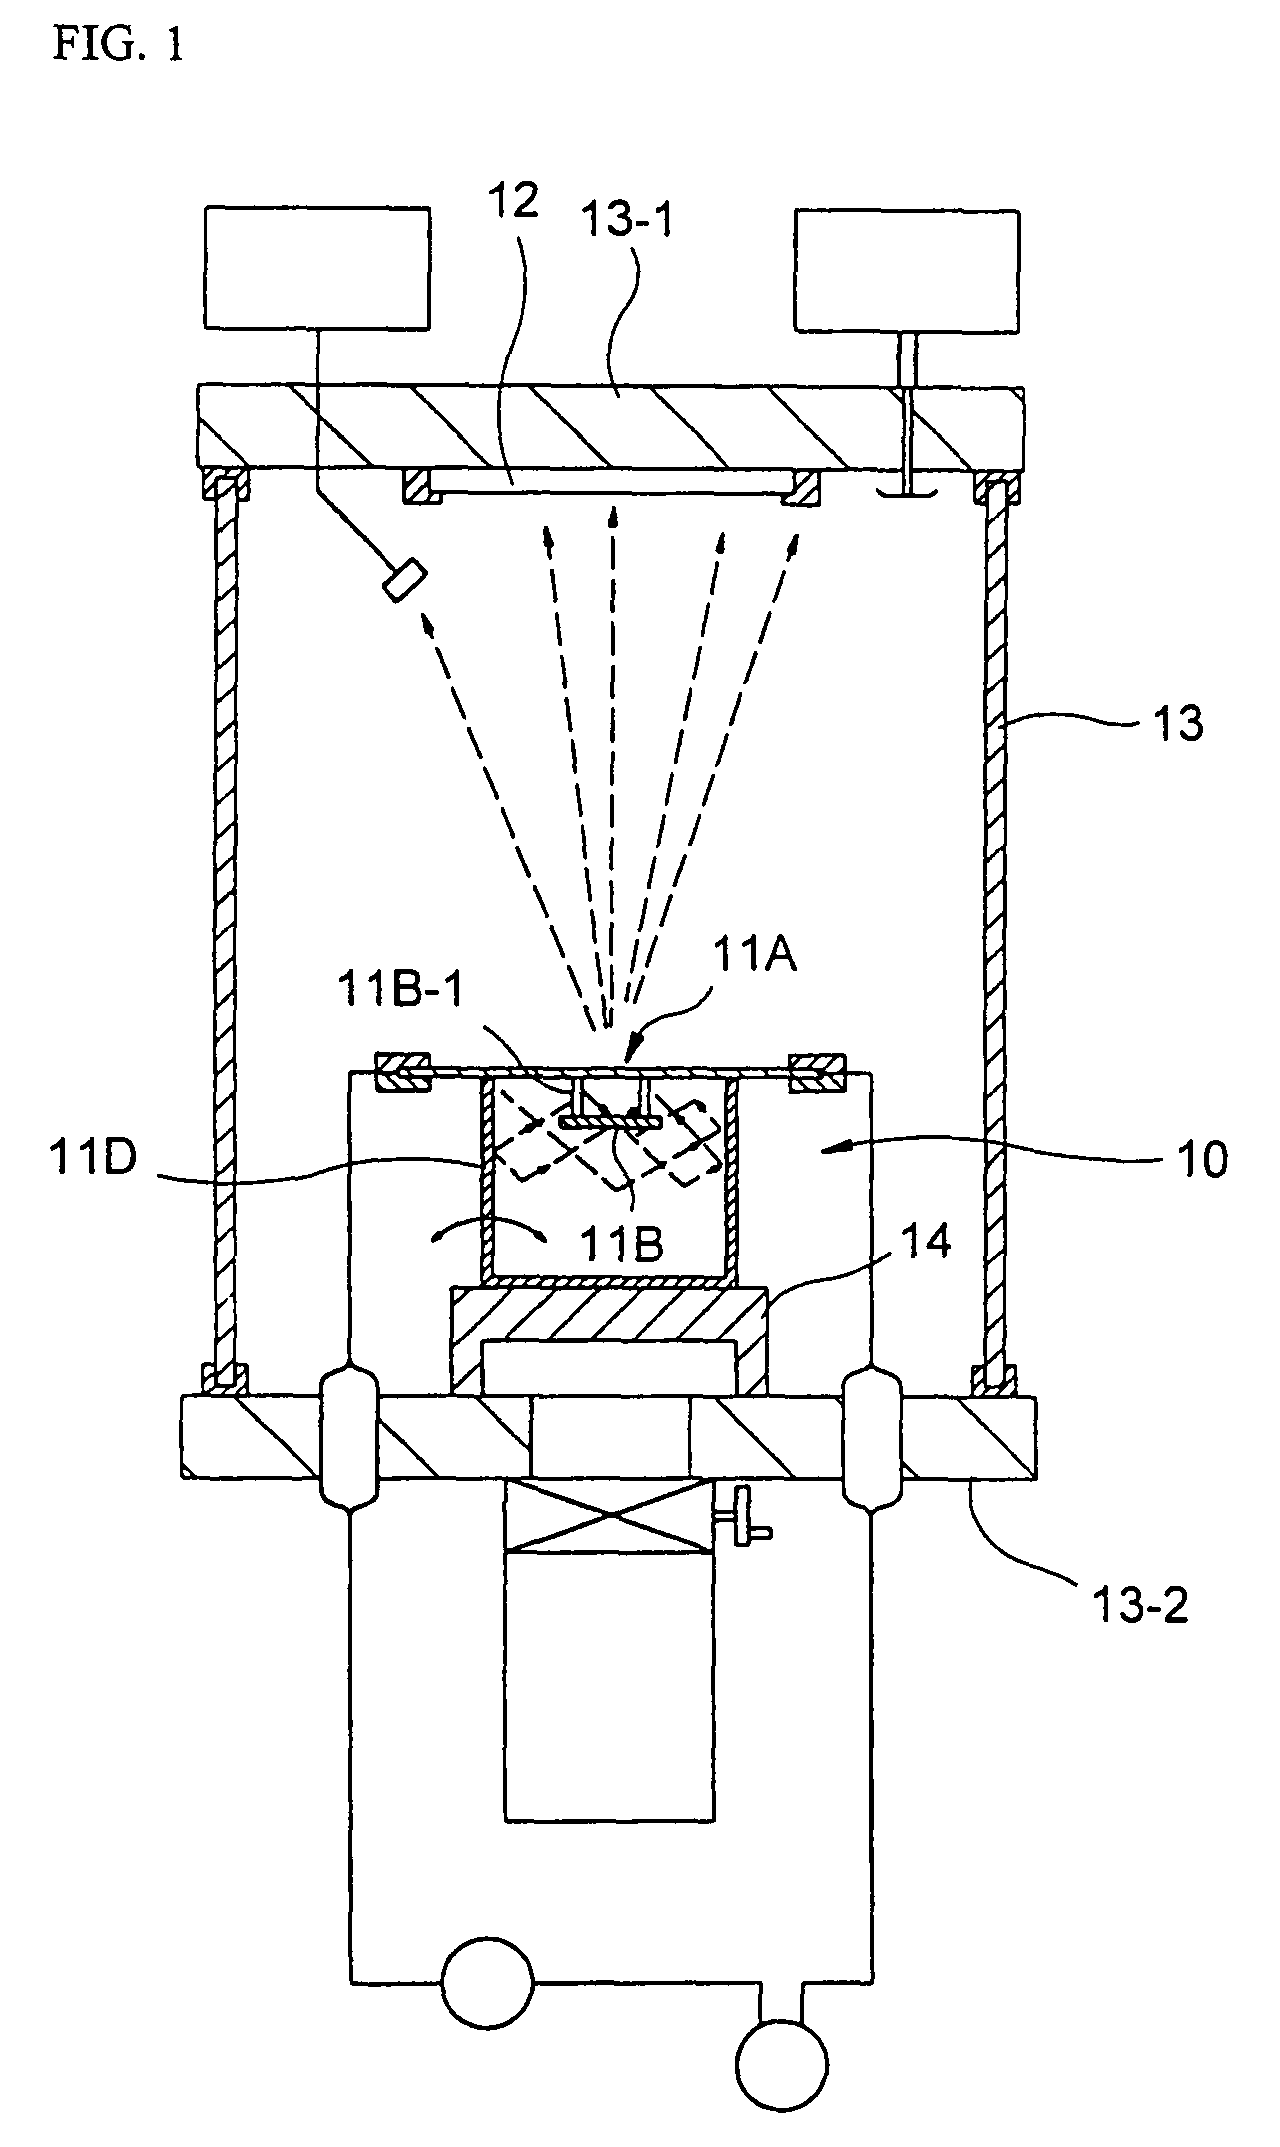 Source for thermal physical vapor deposition of organic electroluminescent layers